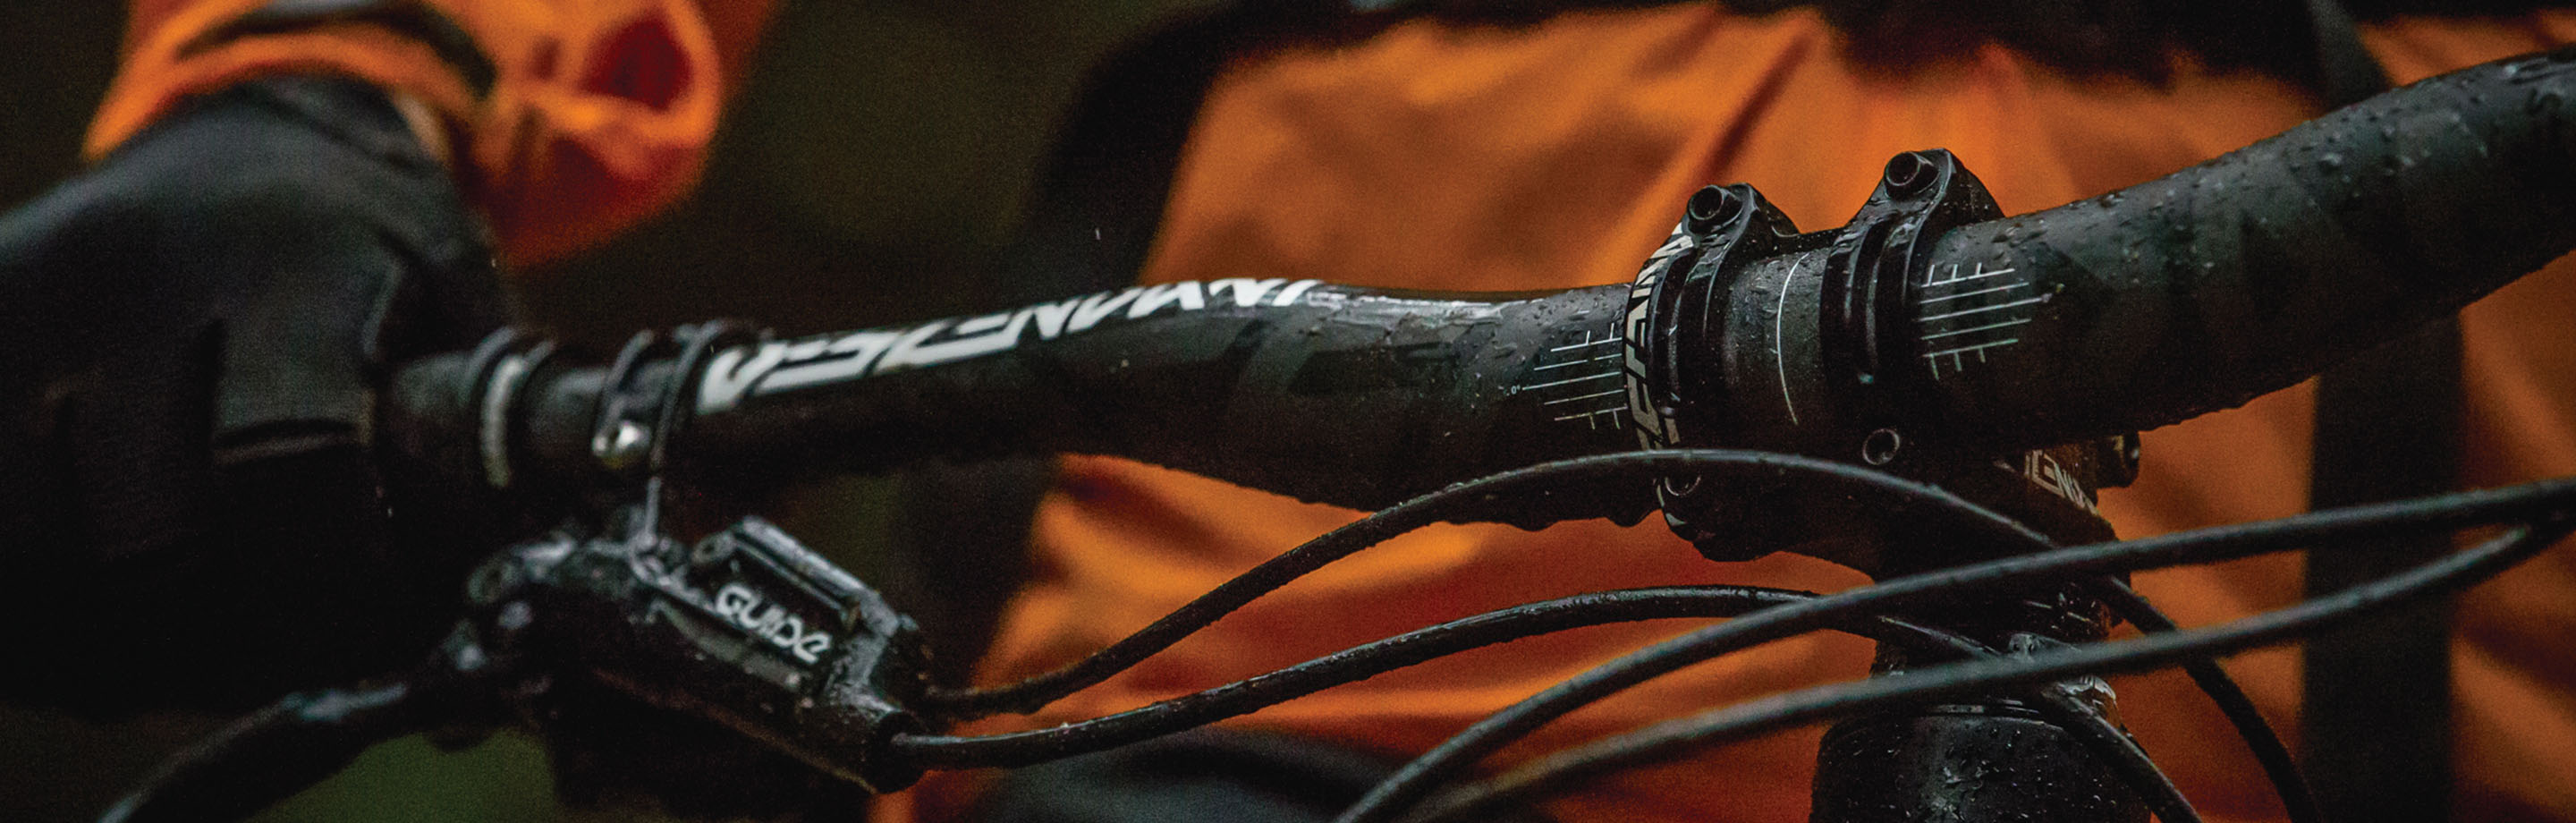 Truvativ - High Quality & Reliable Components for Your MTB